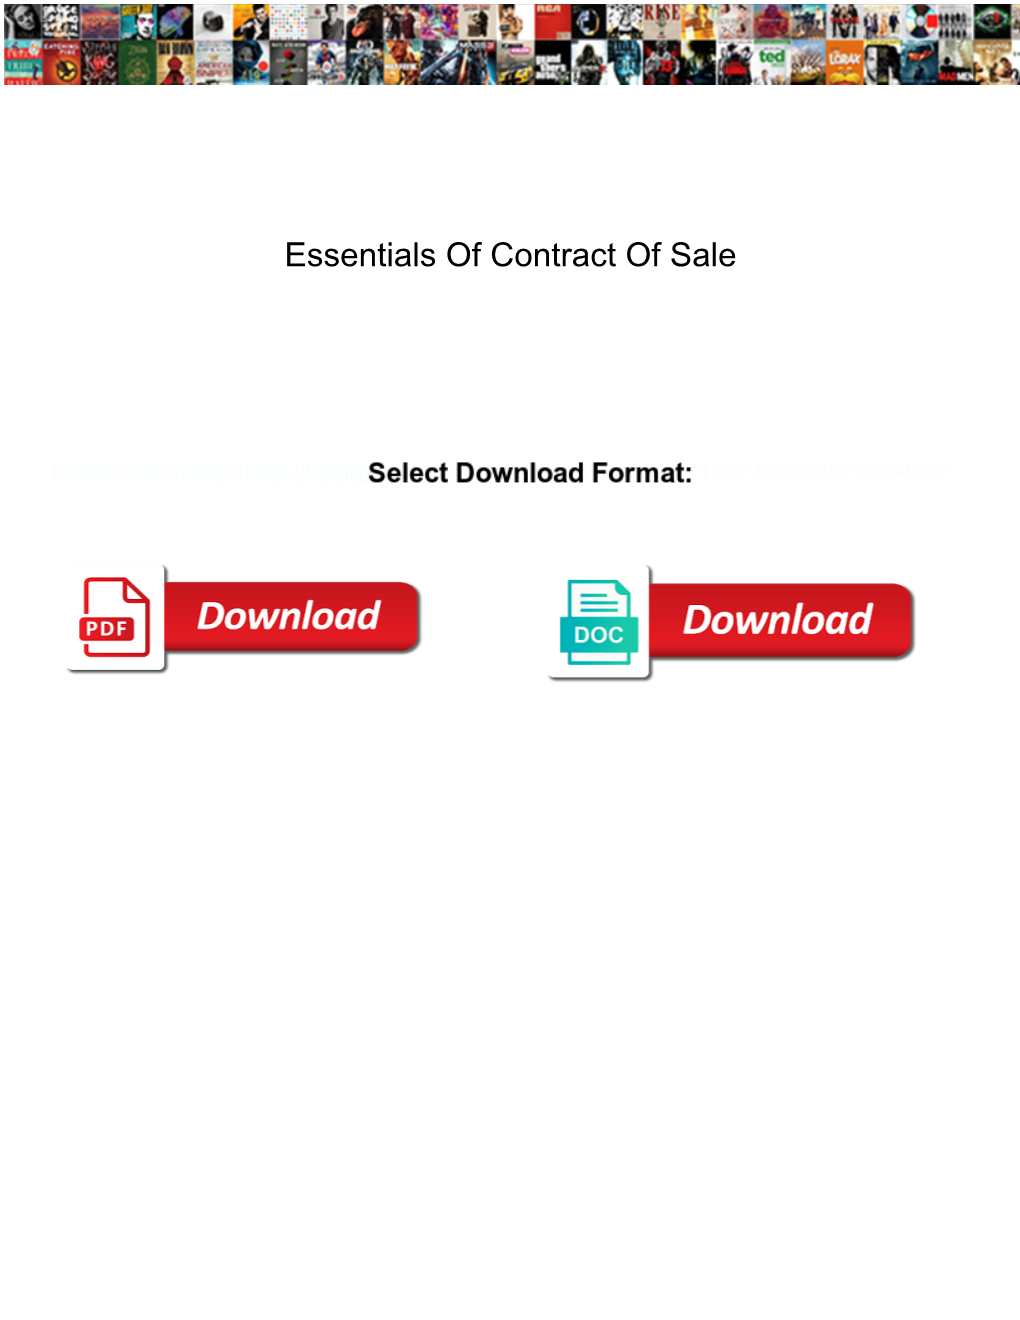 Essentials of Contract of Sale